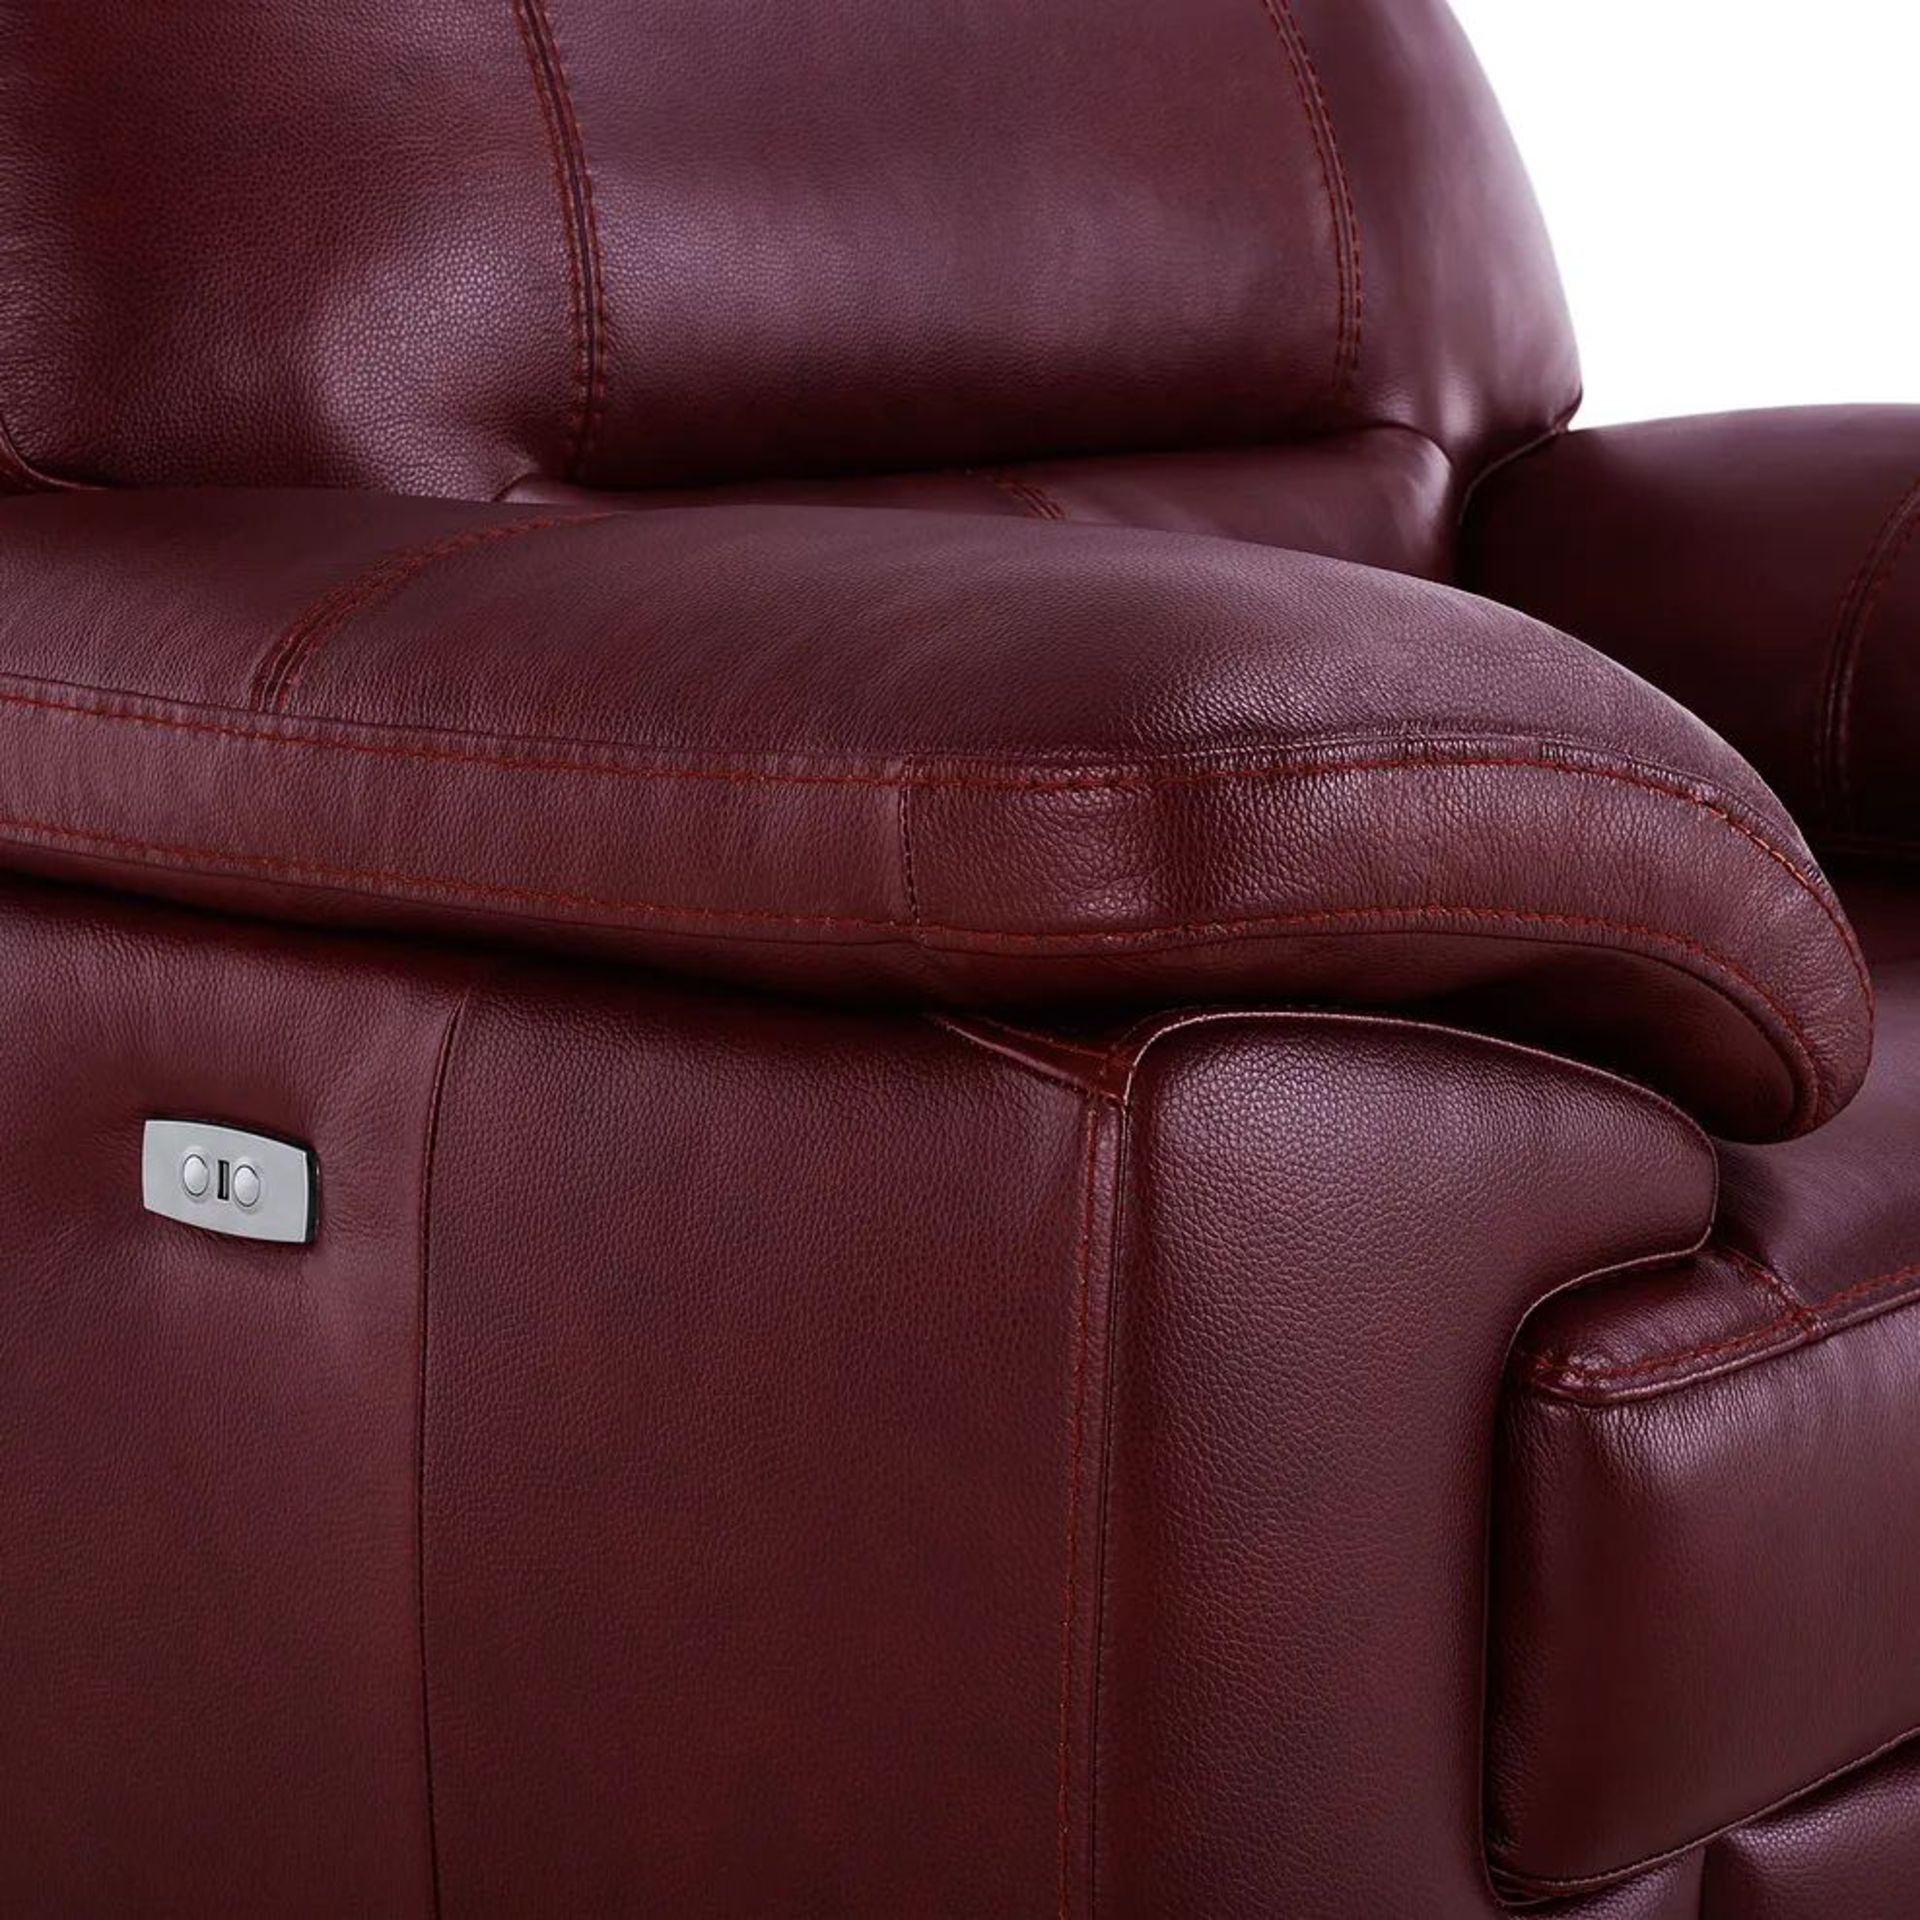 BRAND NEW ARLINGTON Electric Recliner Armchair - BURGANDY LEATHER. RRP £1199. Create a traditional - Image 12 of 12